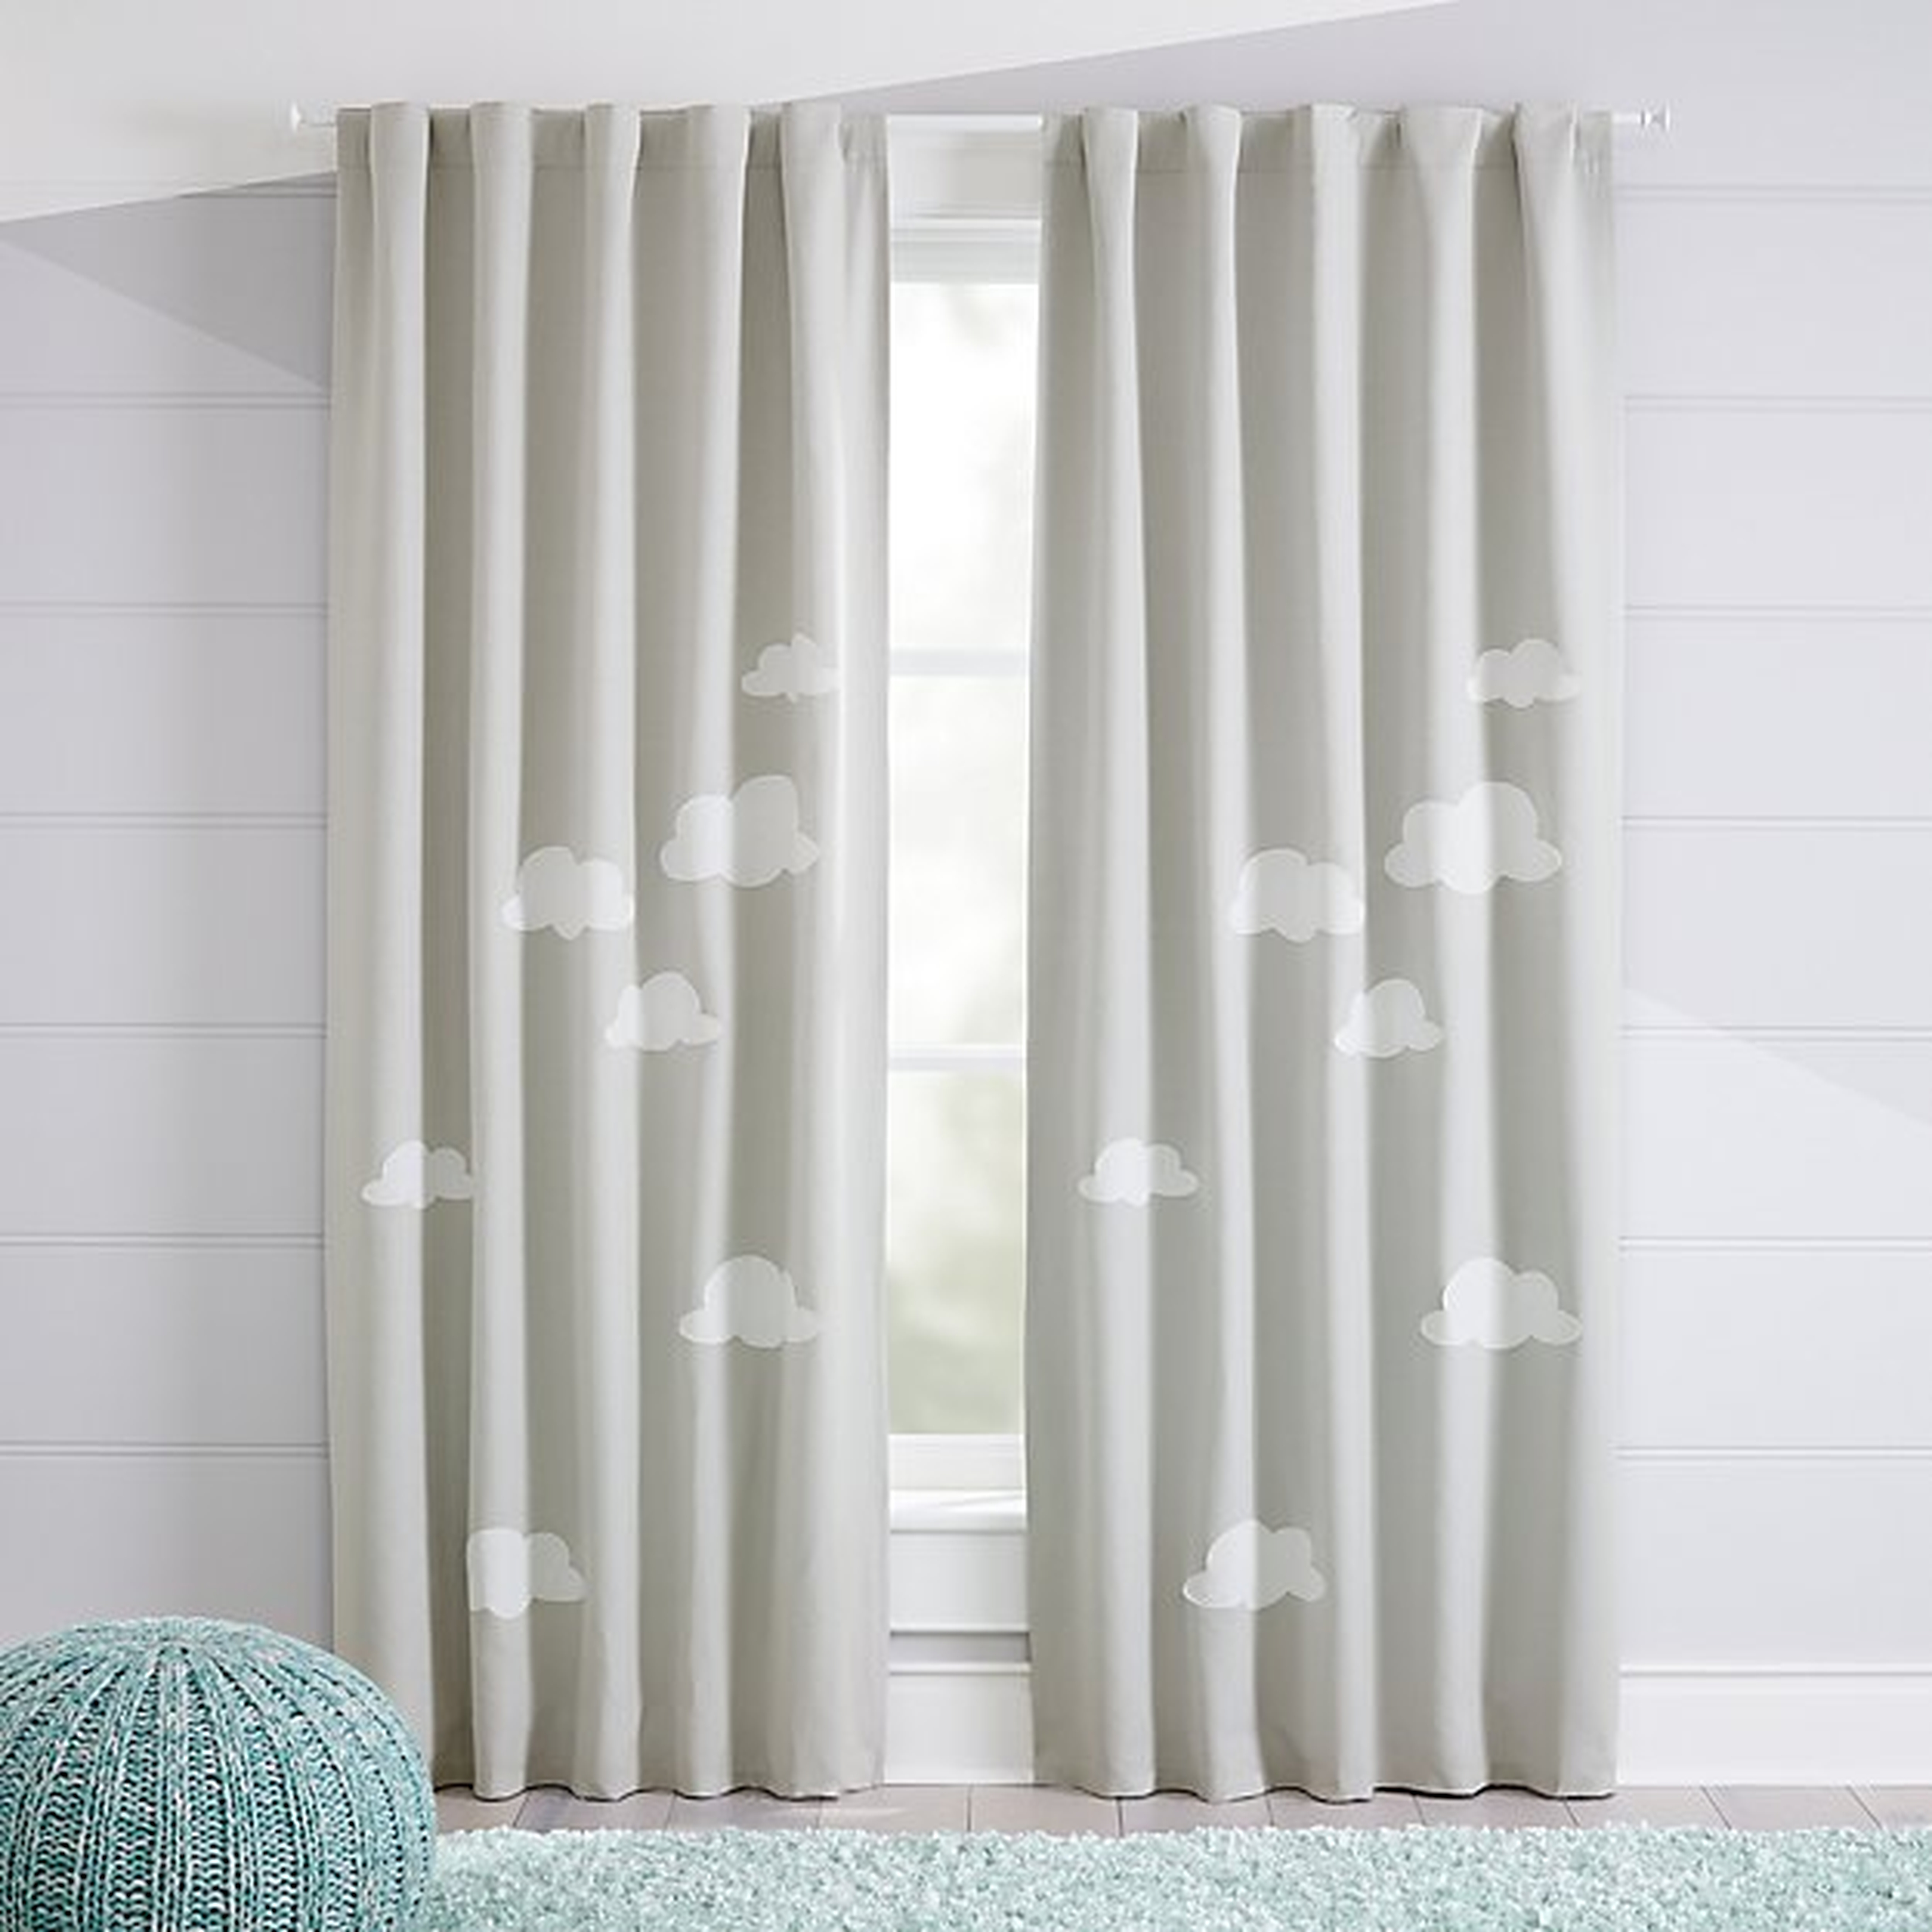 Cloud 63" Blackout Curtain - Crate and Barrel